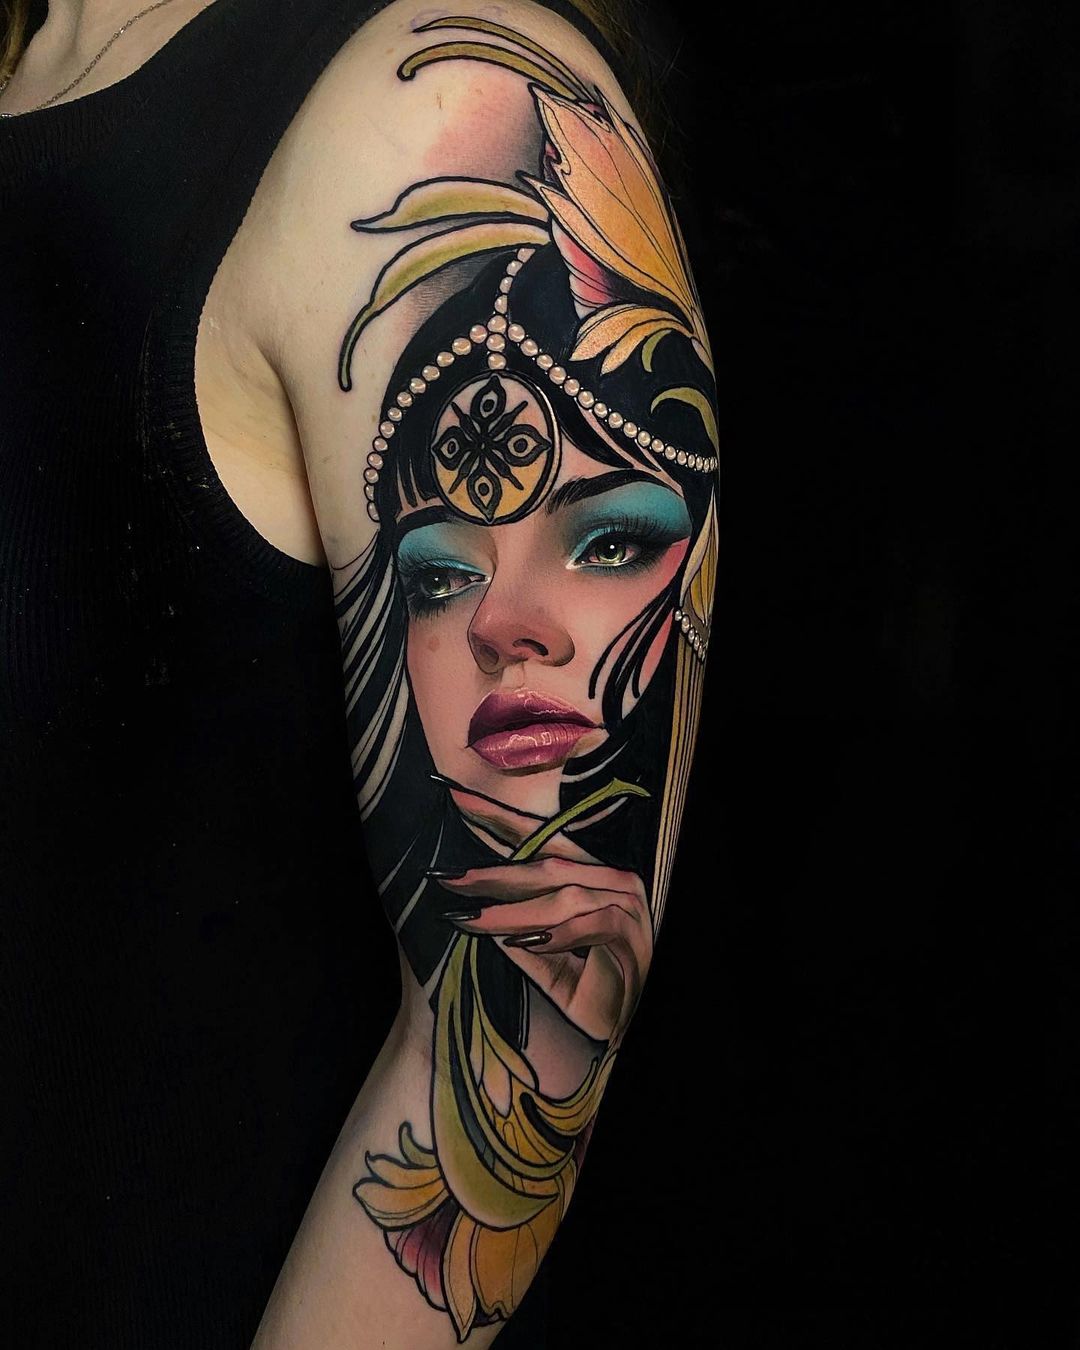 101 Best Cleopatra Tattoo Ideas You'll Have To See To Believe!